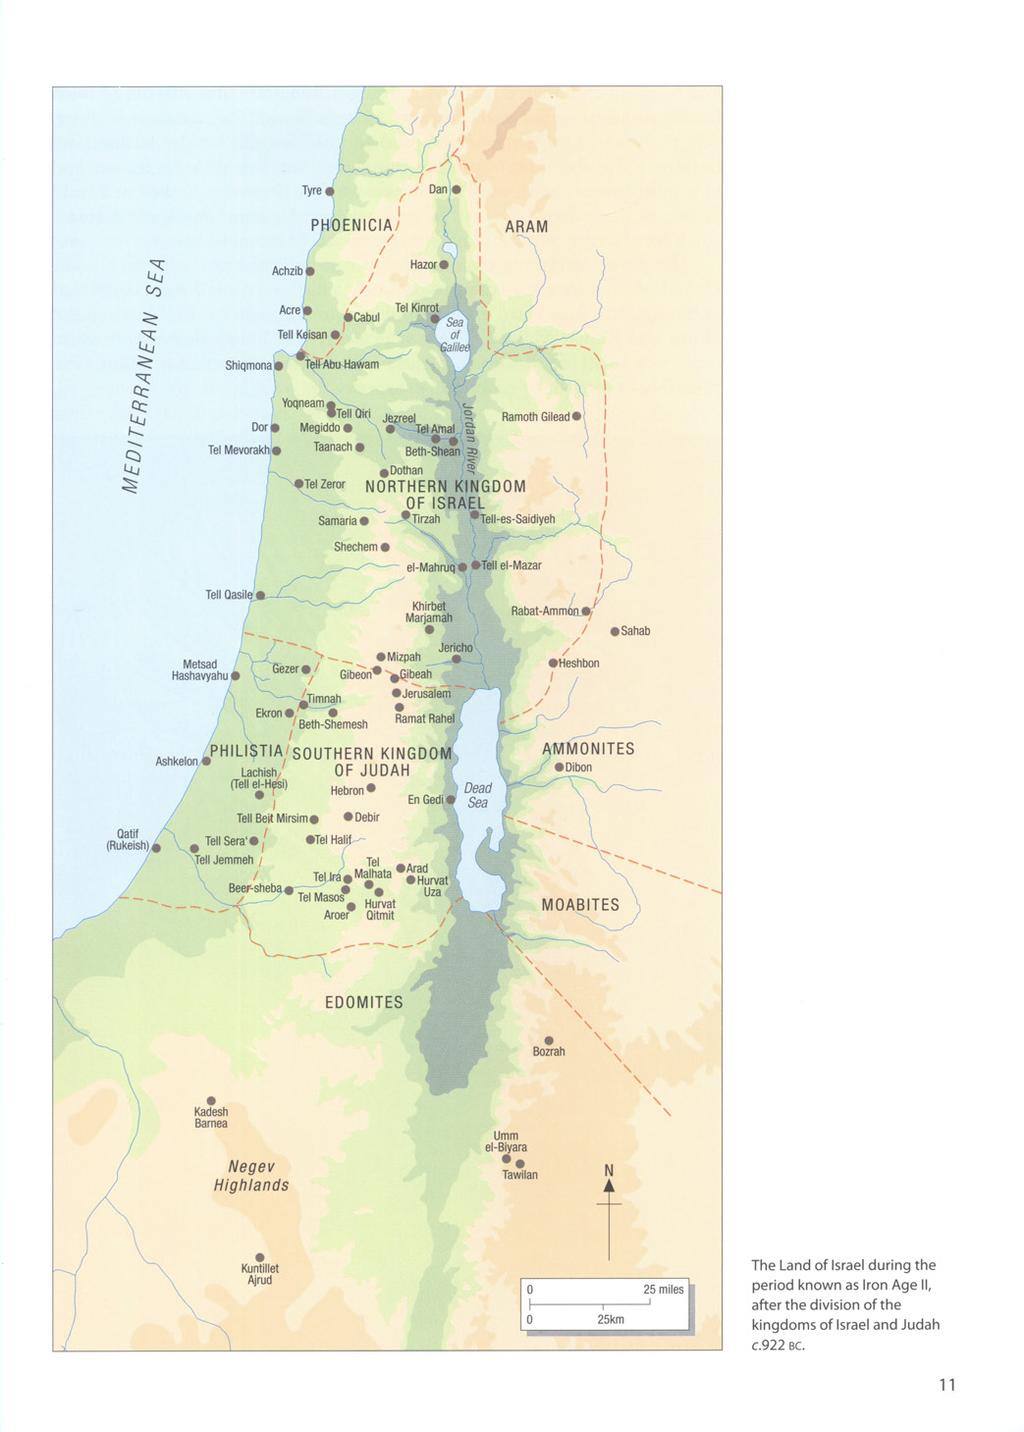 The Land of Israel during the period known as Iron Age II,